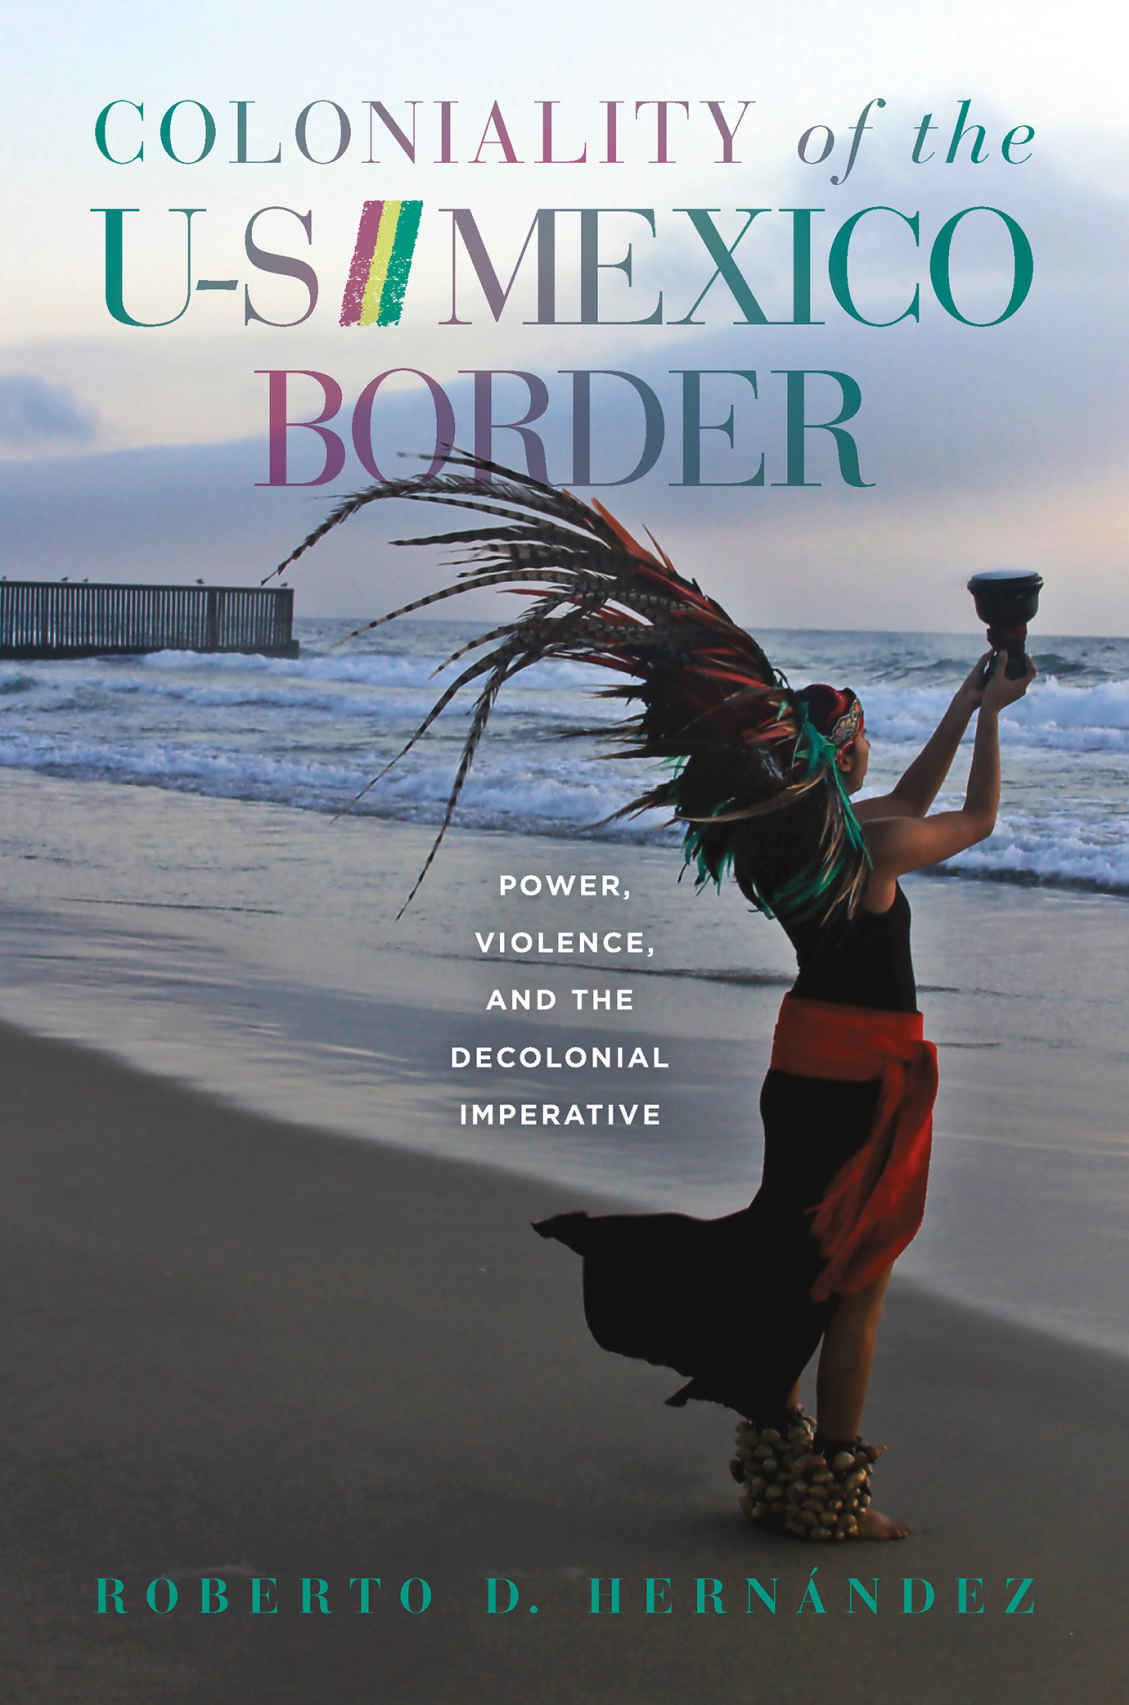 Coloniality of the US-Mexico Border: Power, Violence and the Decolonial Imperative - Roberto D. Hernandez